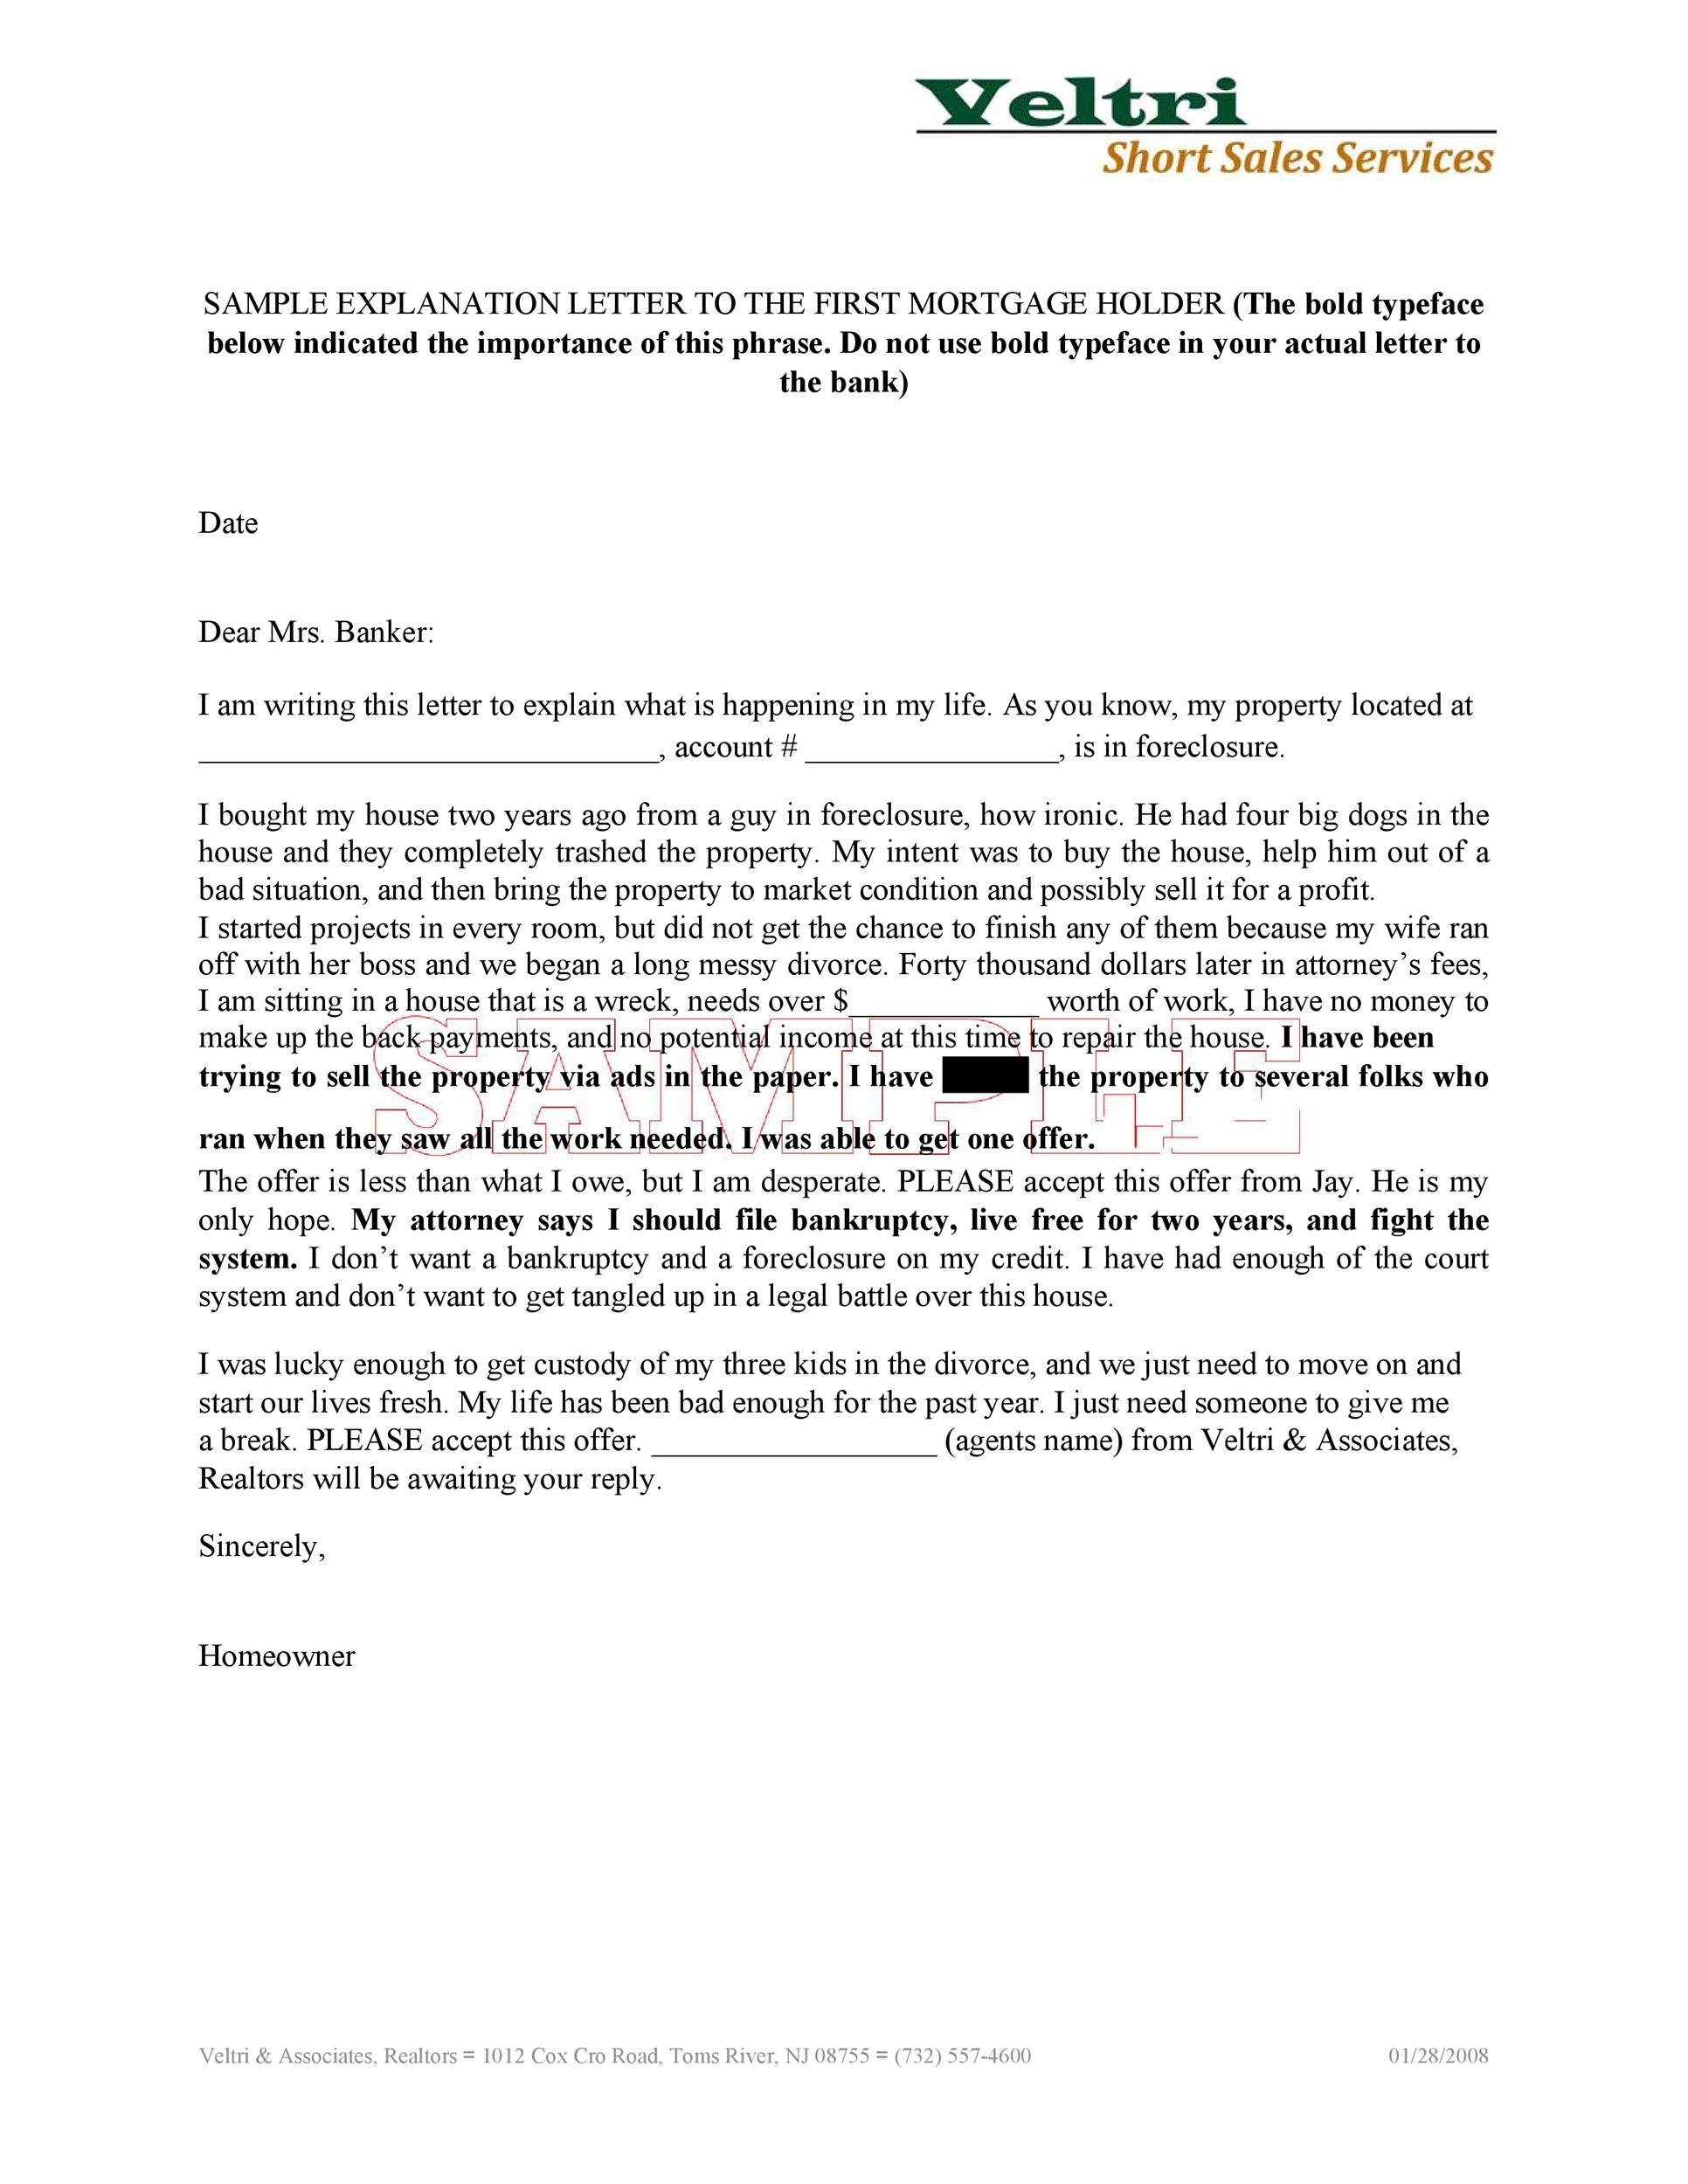 Sample Letter Of Explanation For Buying Second Home from templatelab.com